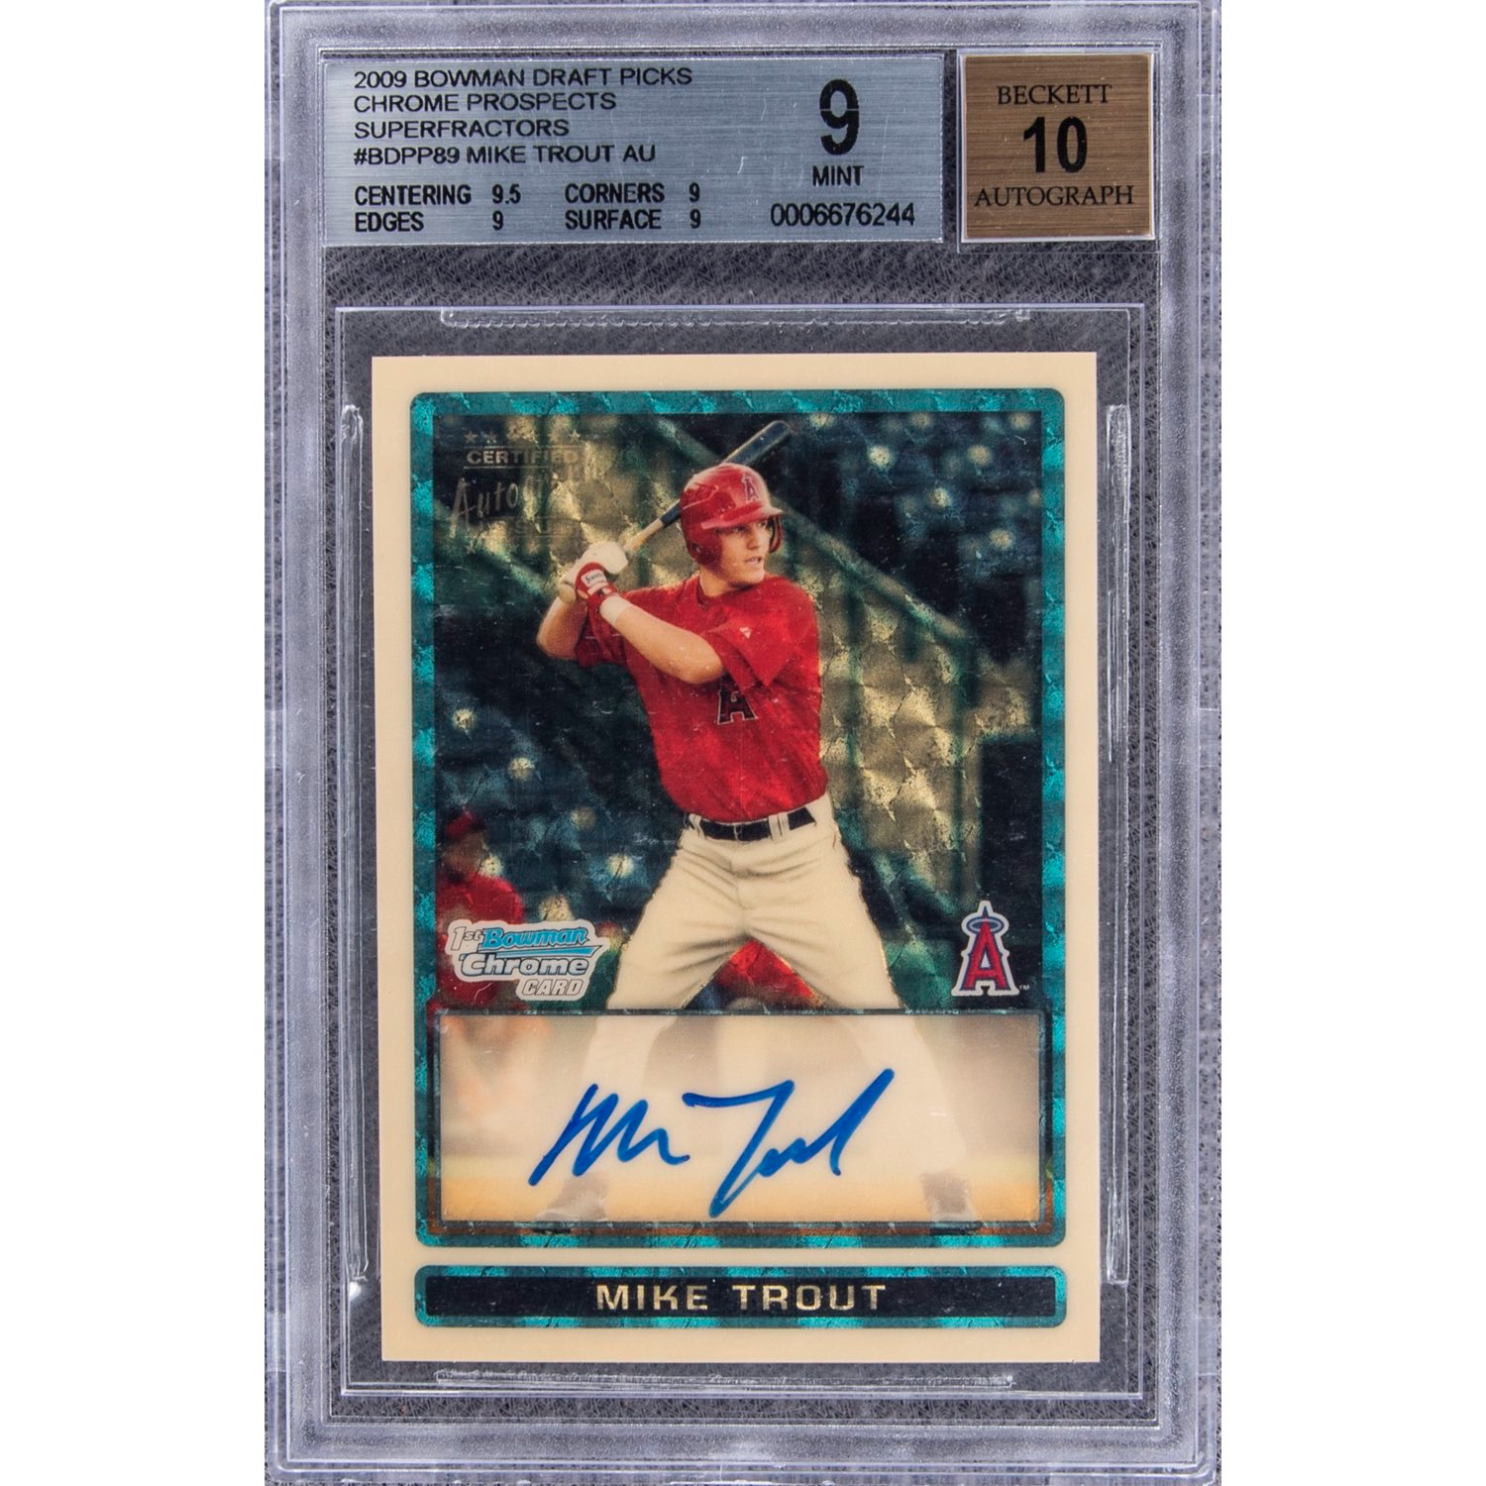 Rare Mike Trout rookie card sells for nearly $4 million at auction